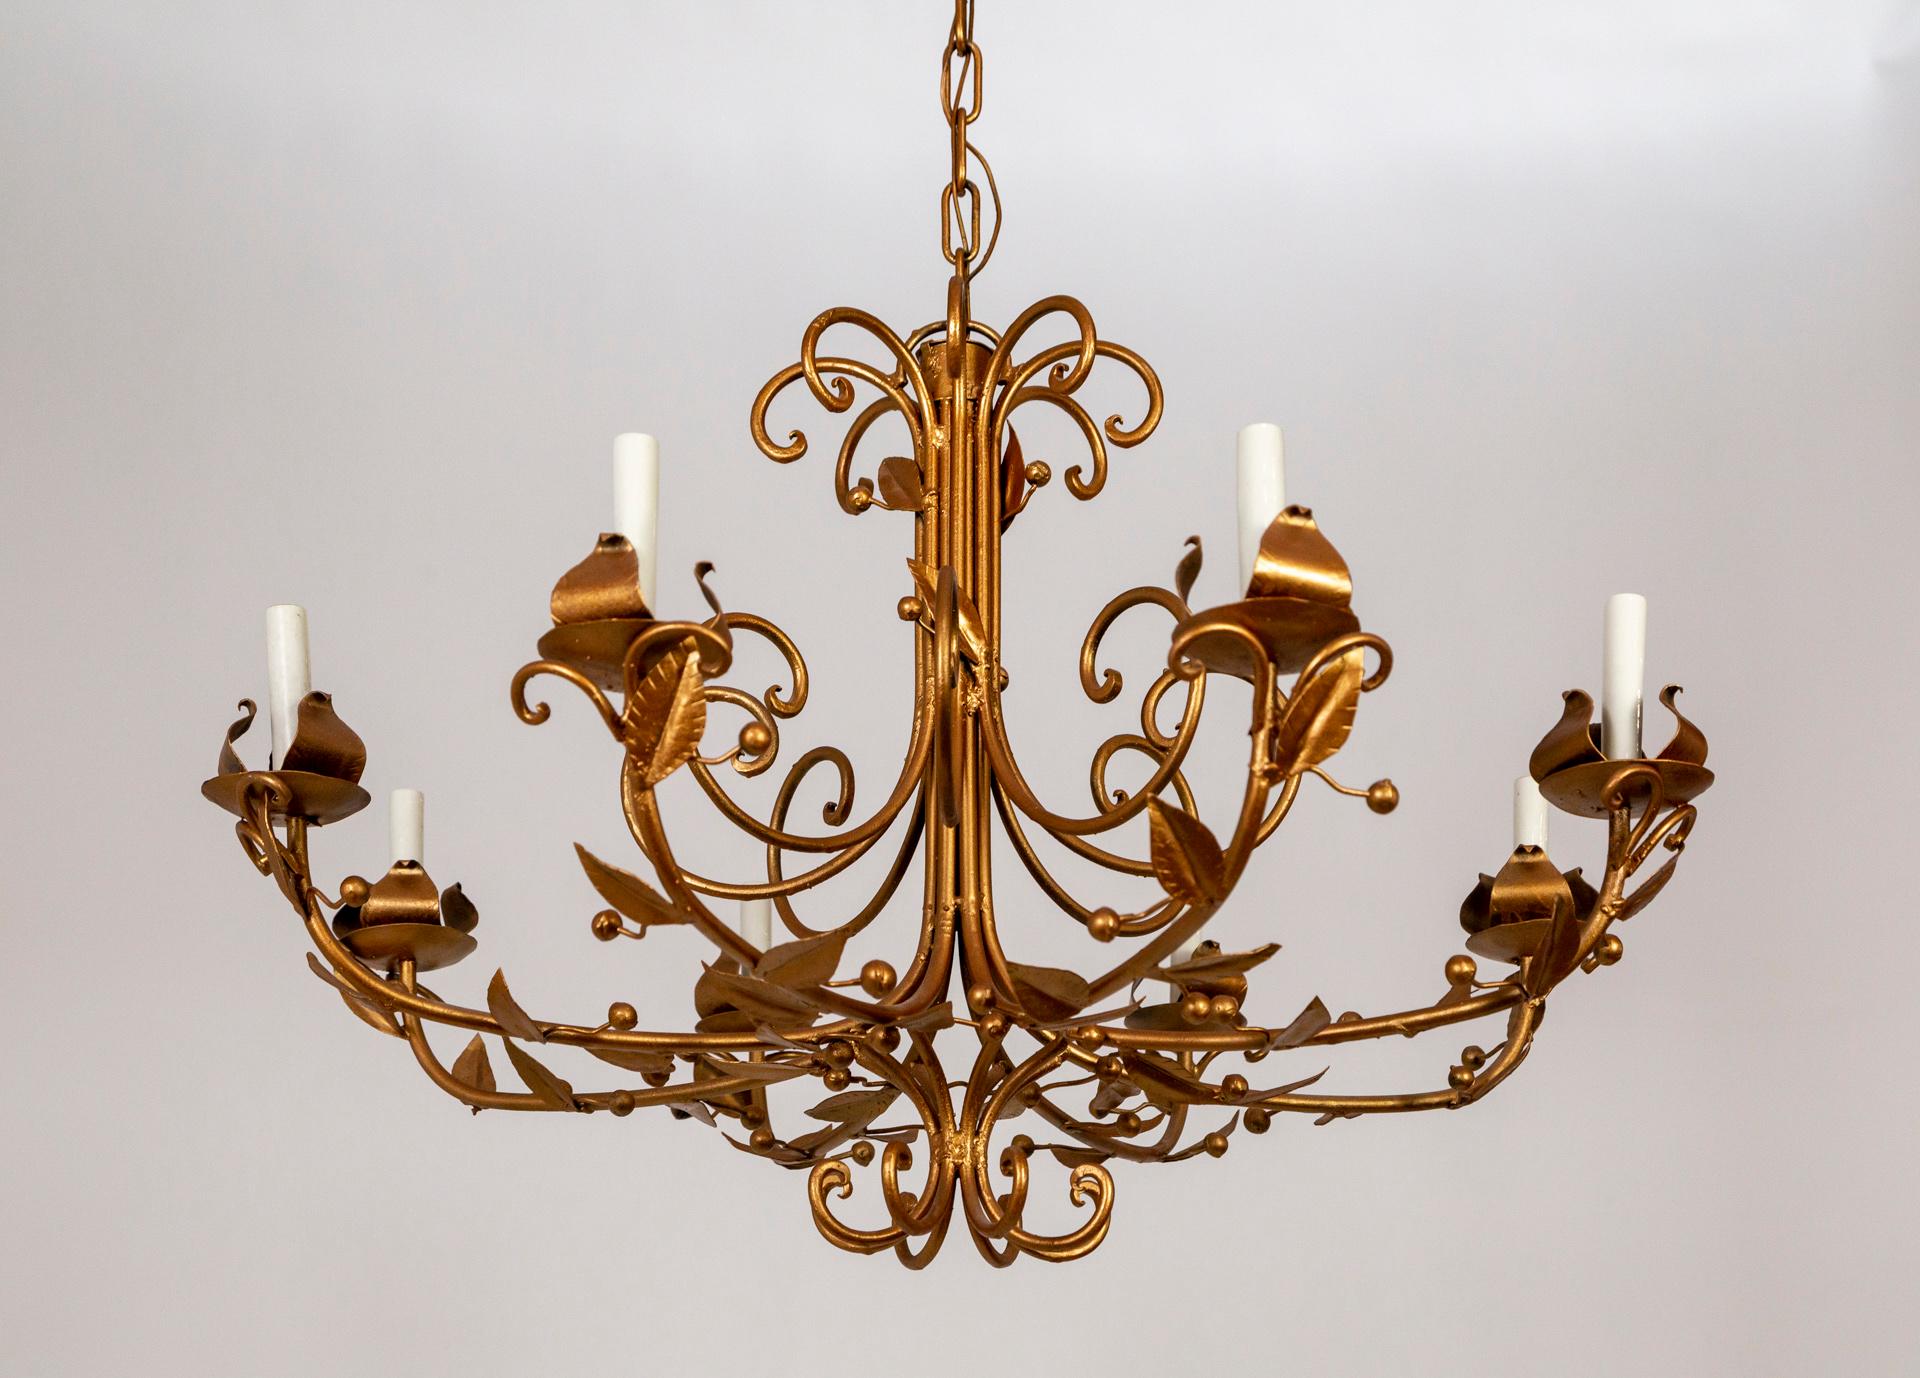 A metal chandelier painted rose gold with curving arms adorned with subtle, simple leaves and berry shapes. Newly rewired. 38.75